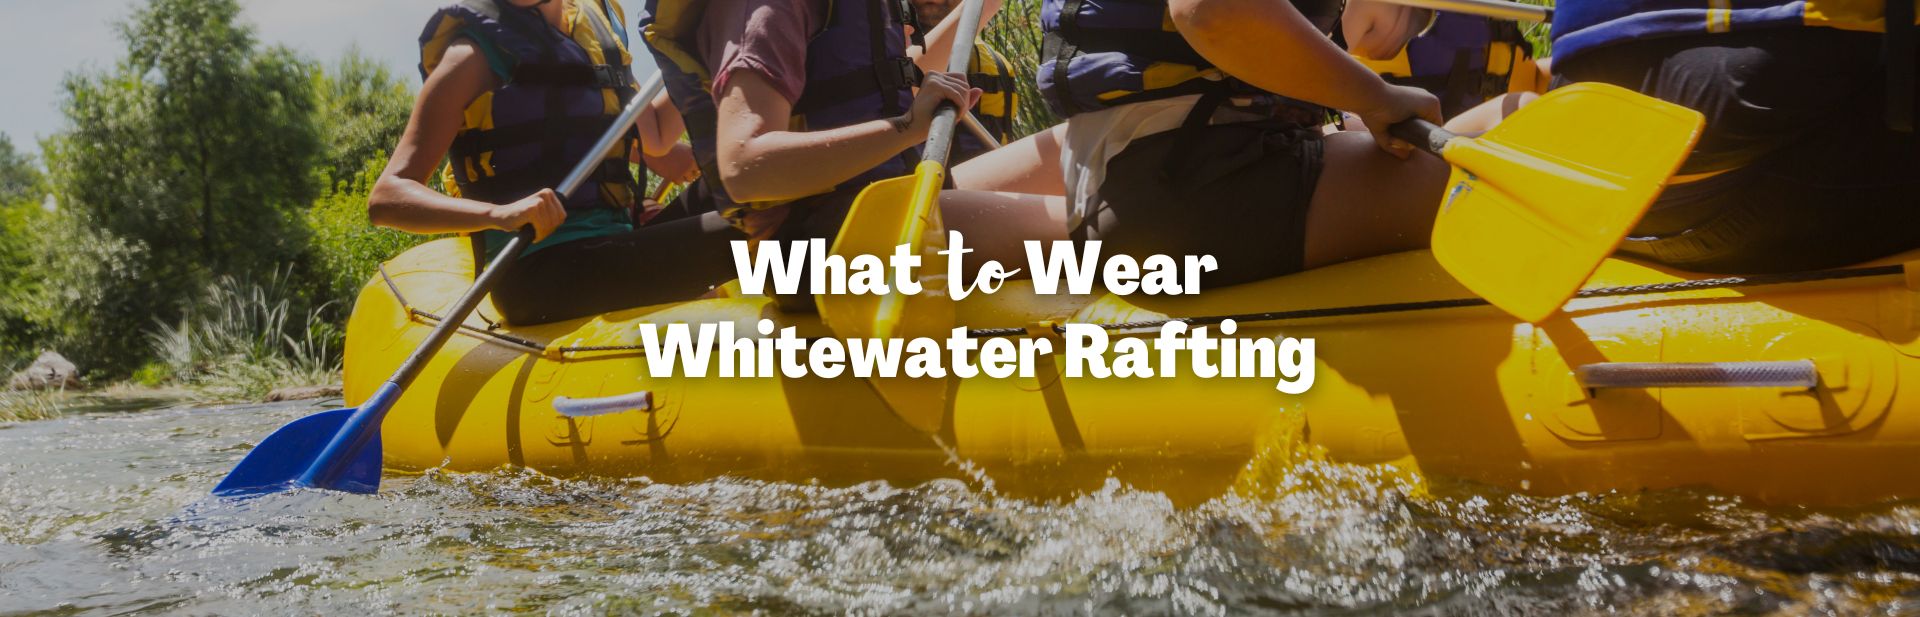 Stay Warm & Dry: Essential Clothing Tips for Whitewater Rafting